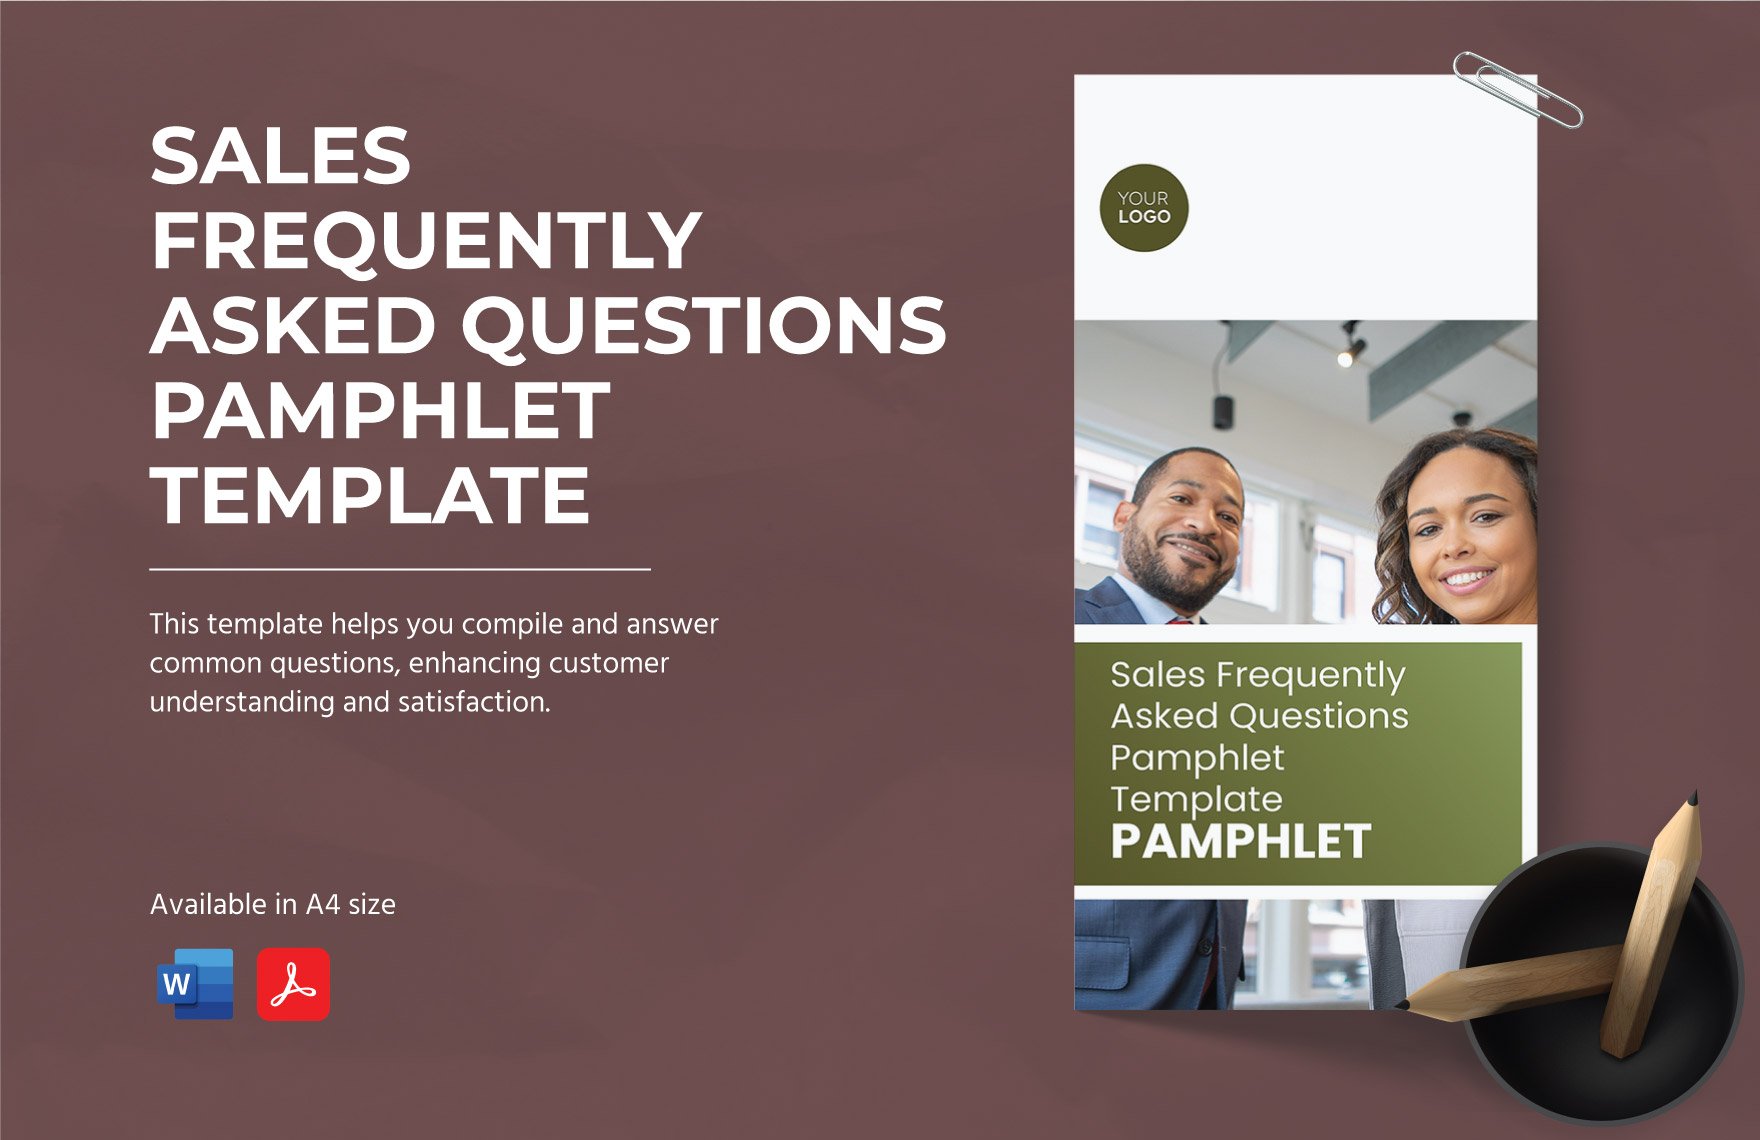 Sales Frequently Asked Questions Pamphlet Template